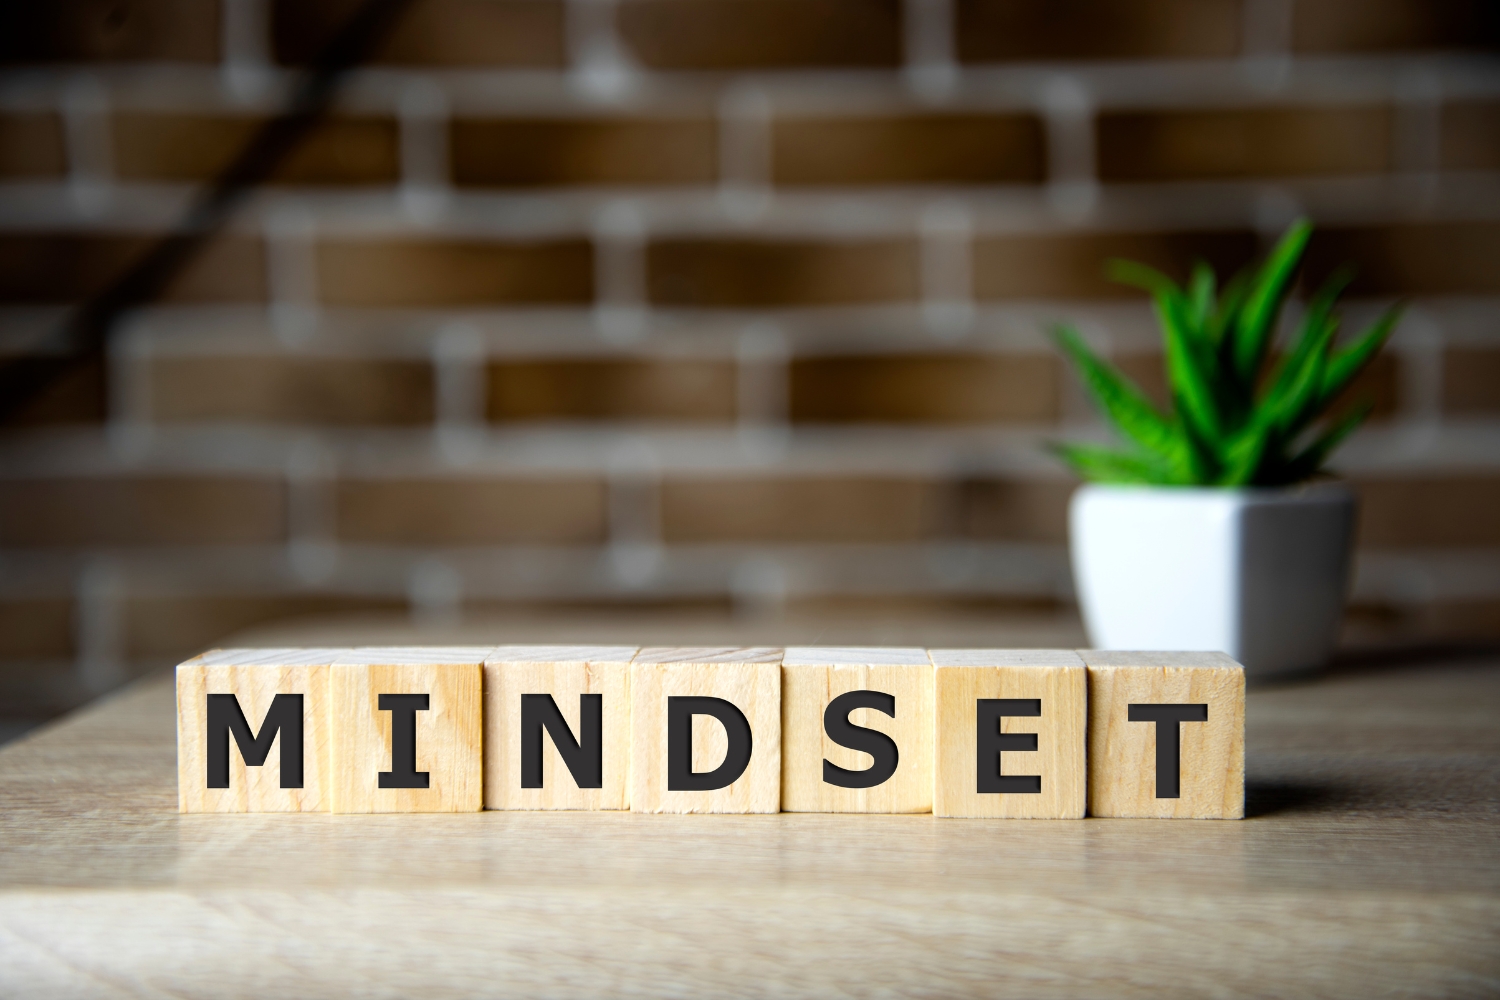 Transform Your Mindset: 10 Powerful Things to Do When Stuck in a Negative Rut